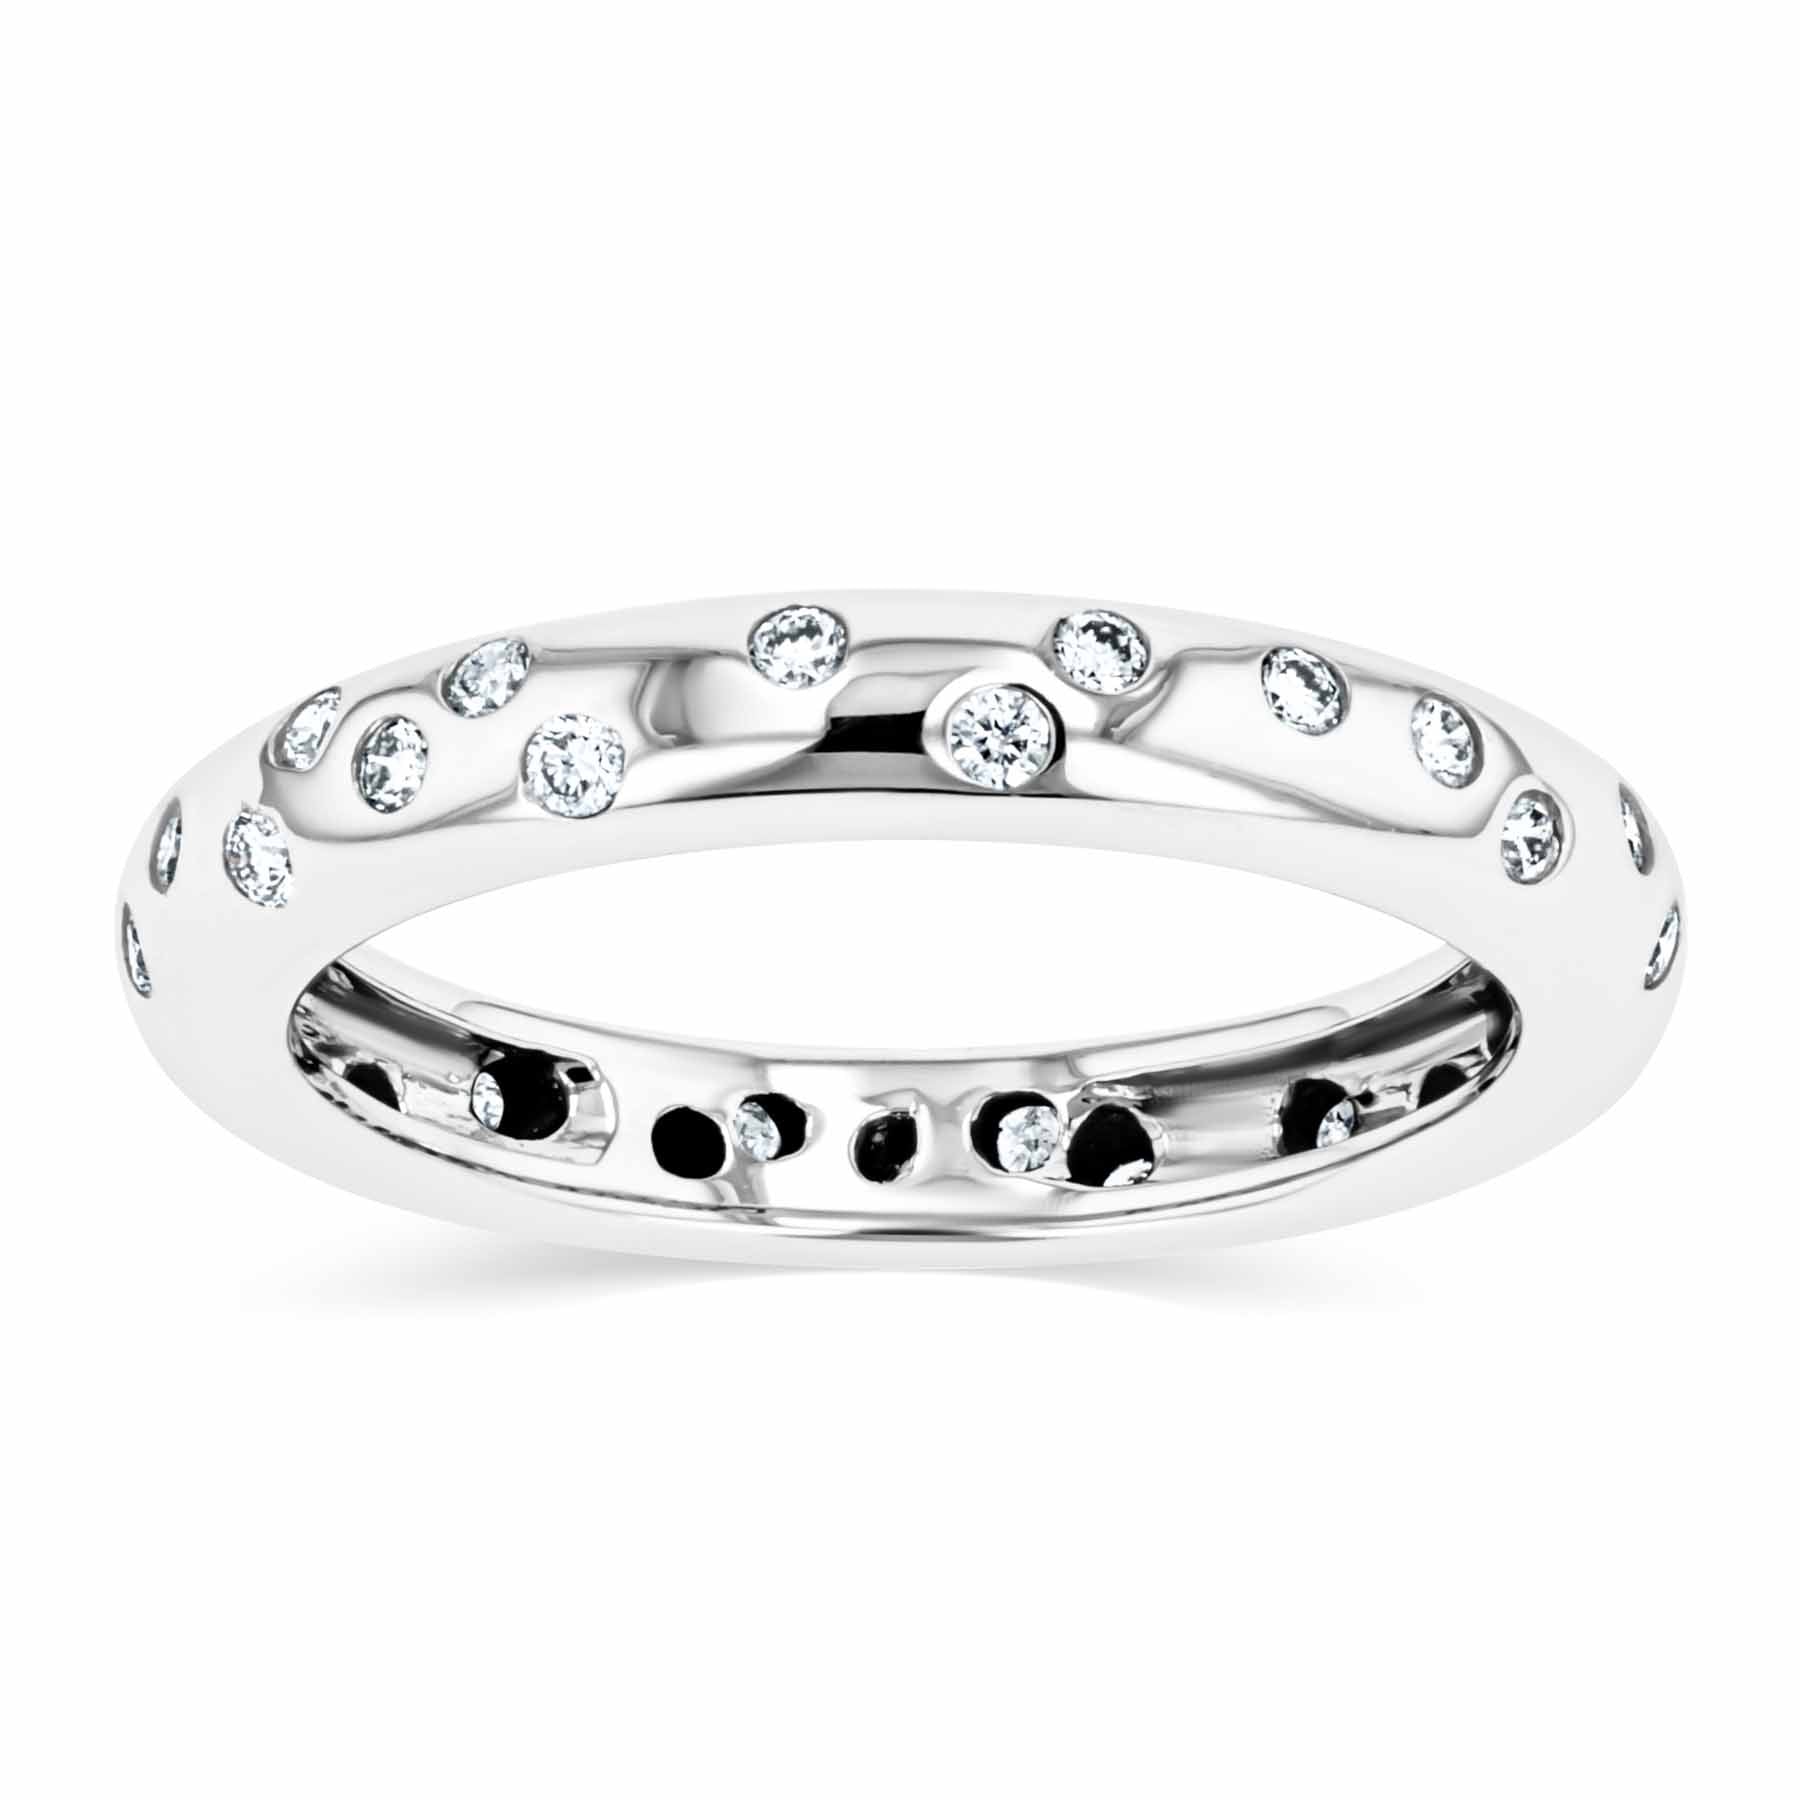 Shown in 14K White Gold|scattered eternity lab grown diamond band in 14k white gold metal